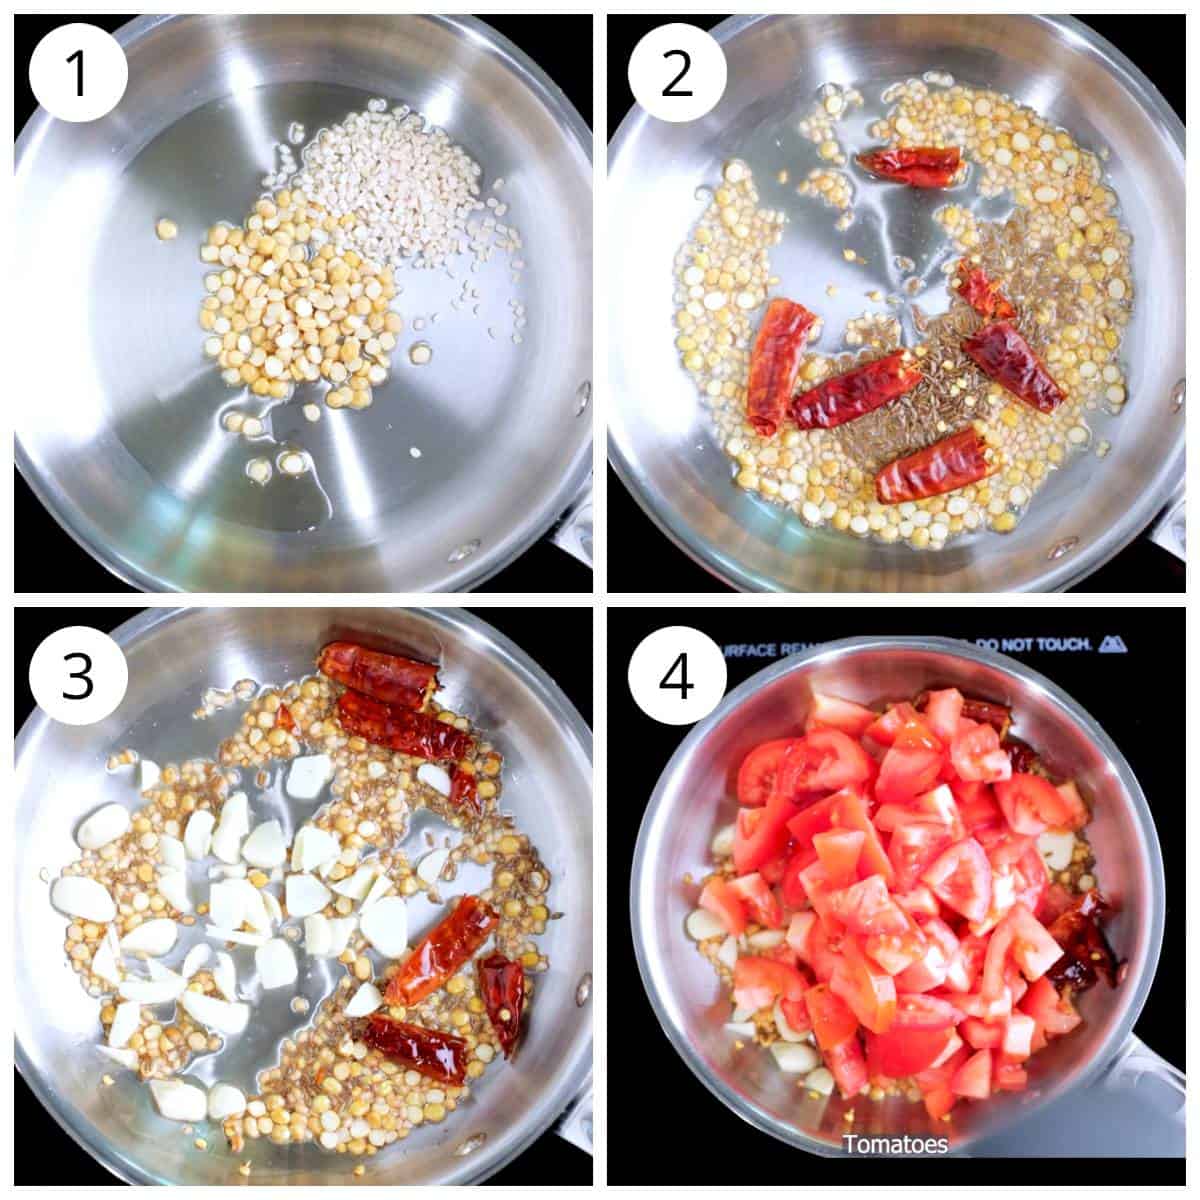 Steps for adding dal, red chilies, garlic and tomatoes for making tomato chutney